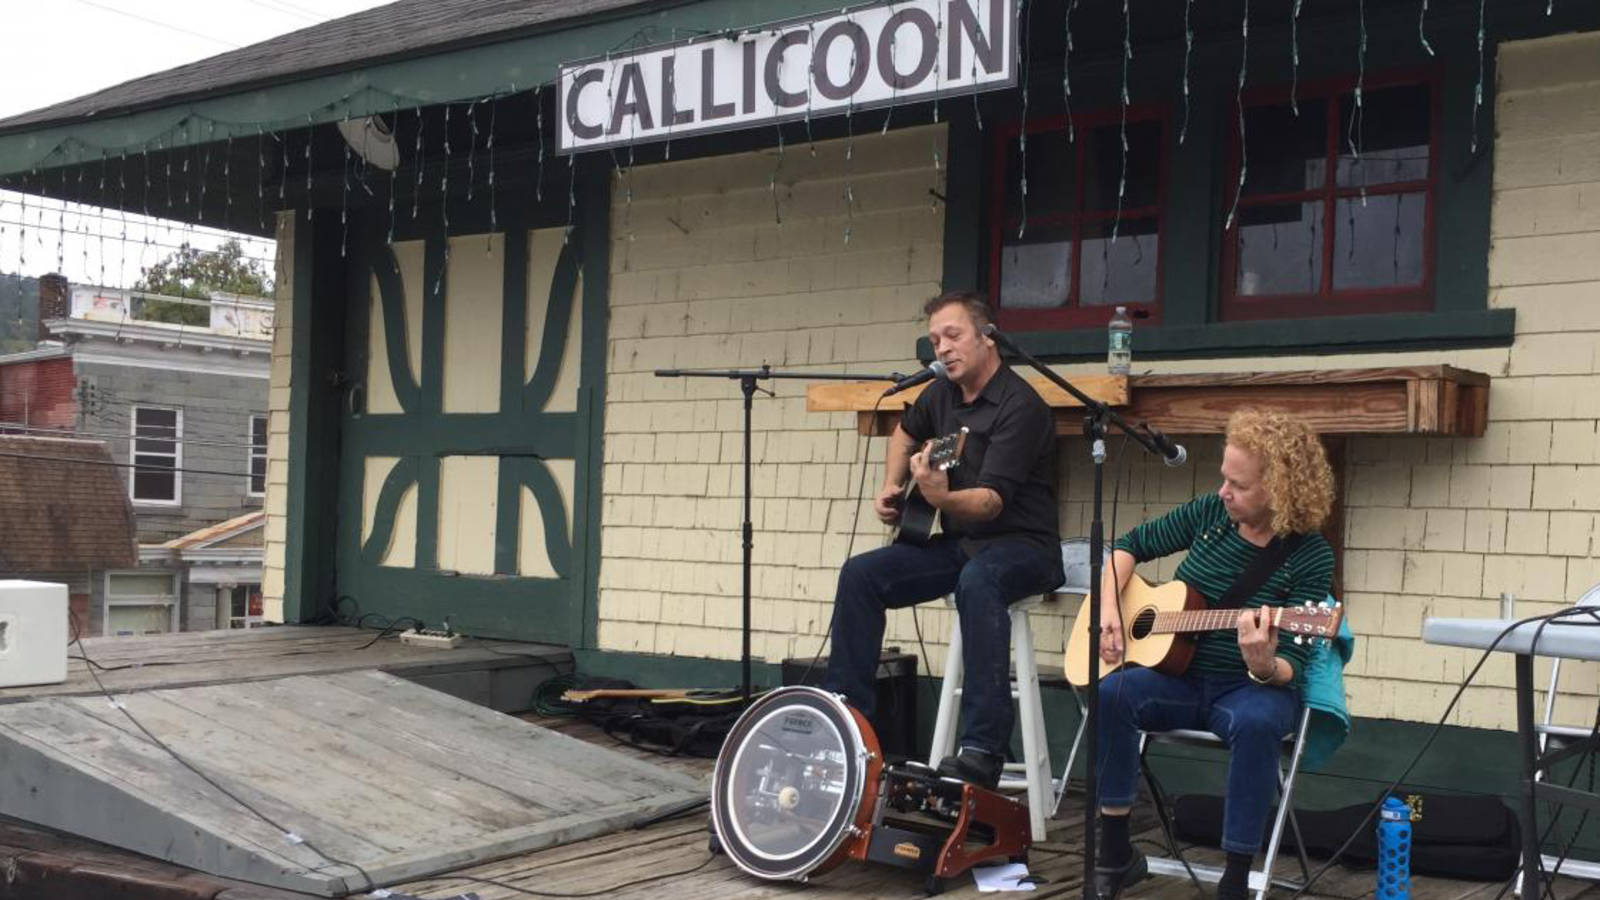 <p>Central New York Railroad has graciously allowed use of the Callicoon Depot's former loading dock as a stage for popular community events. Musicians Brewster Smith and Elizabeth Rose perform.</p>